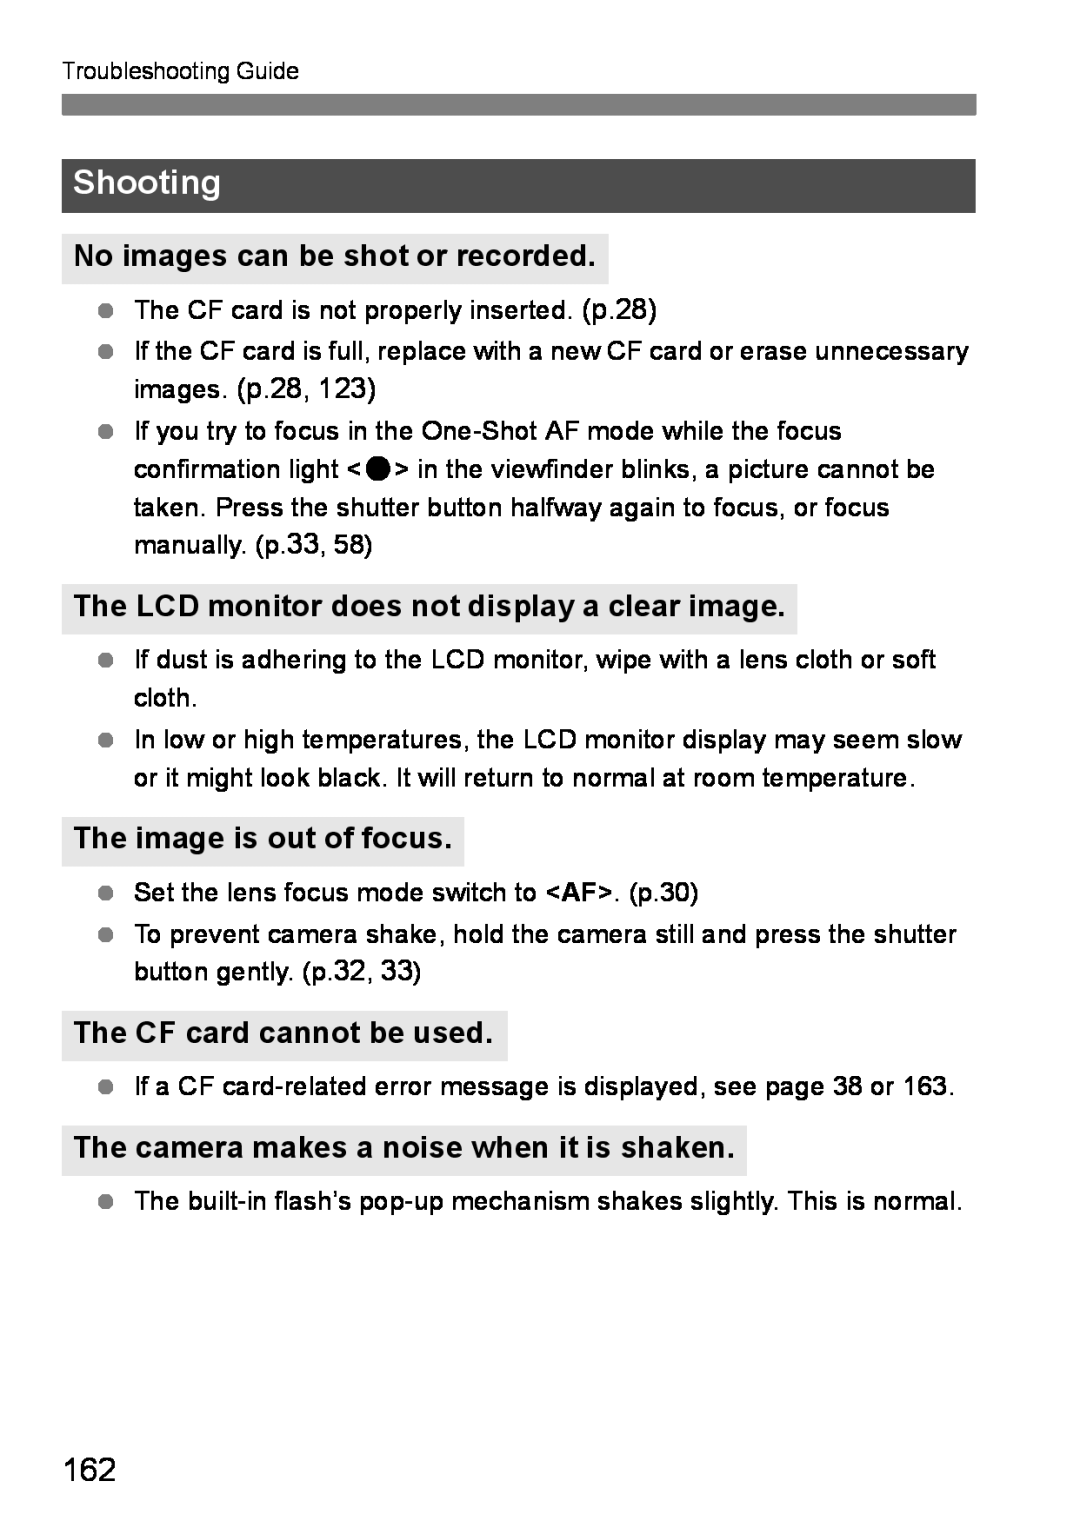 Canon EOS DIGITAL REBEL XTI Shooting, No images can be shot or recorded, The LCD monitor does not display a clear image 